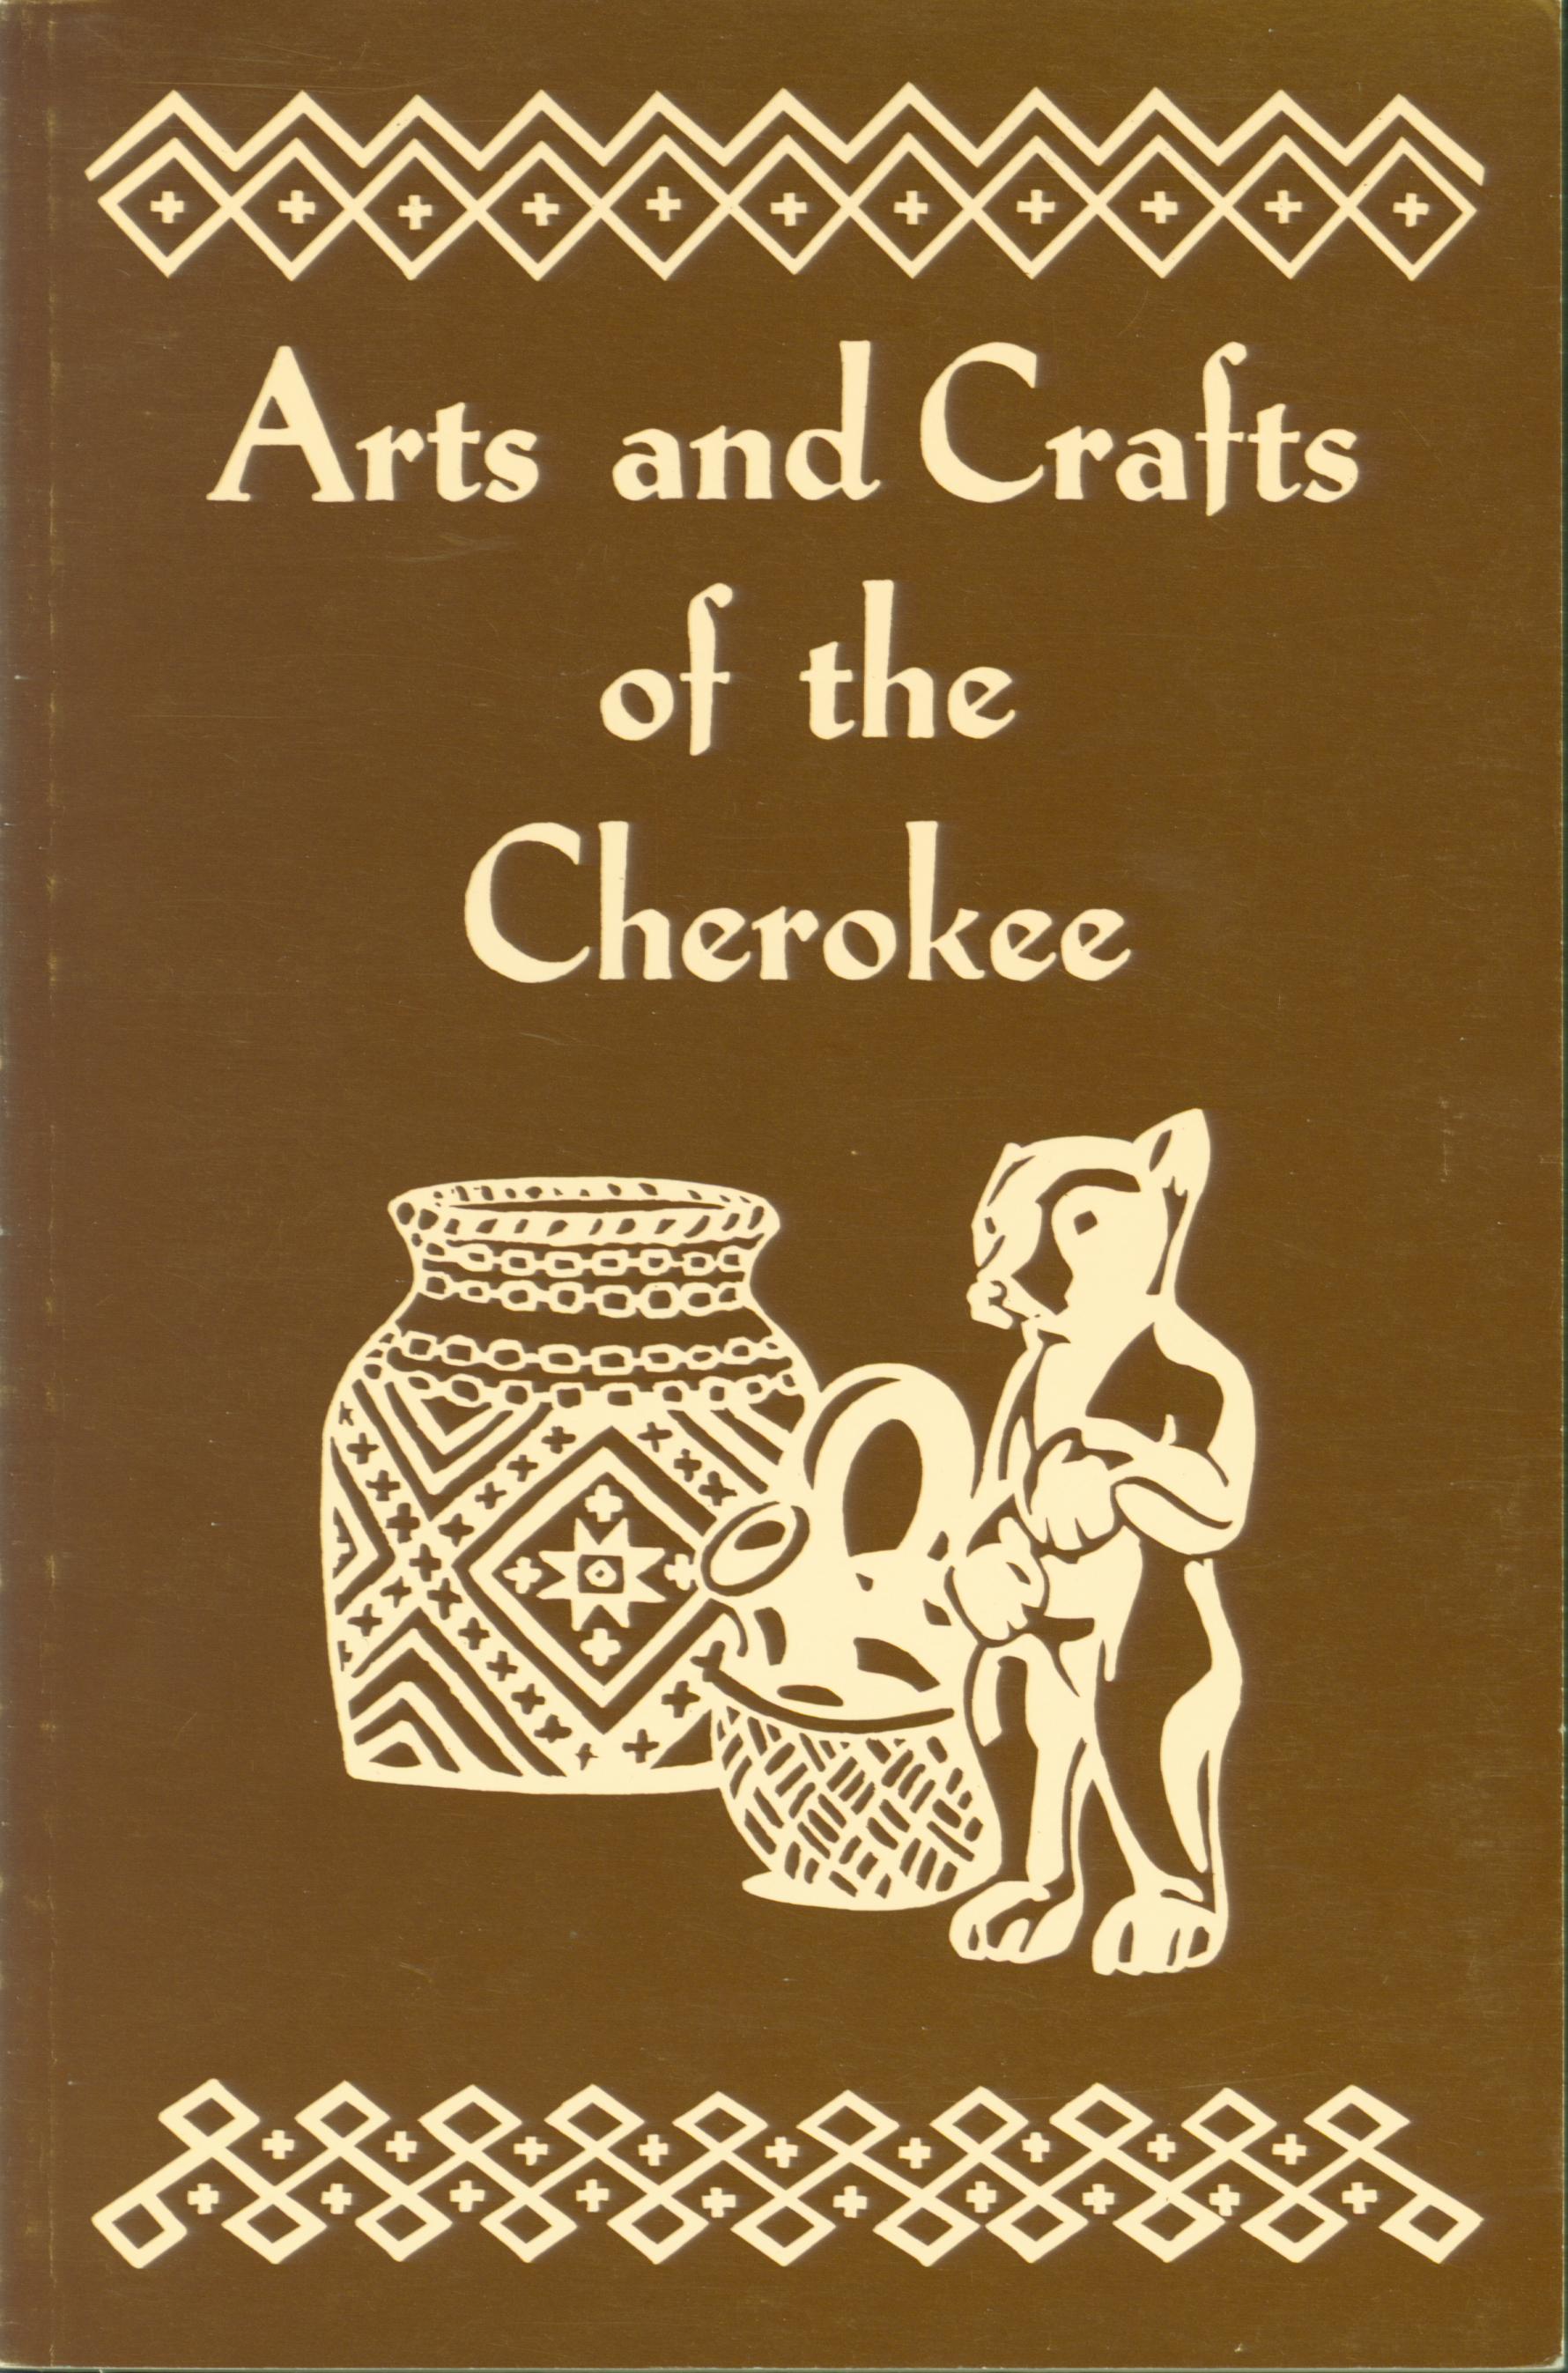 ARTS & CRAFTS OF THE CHEROKEE.